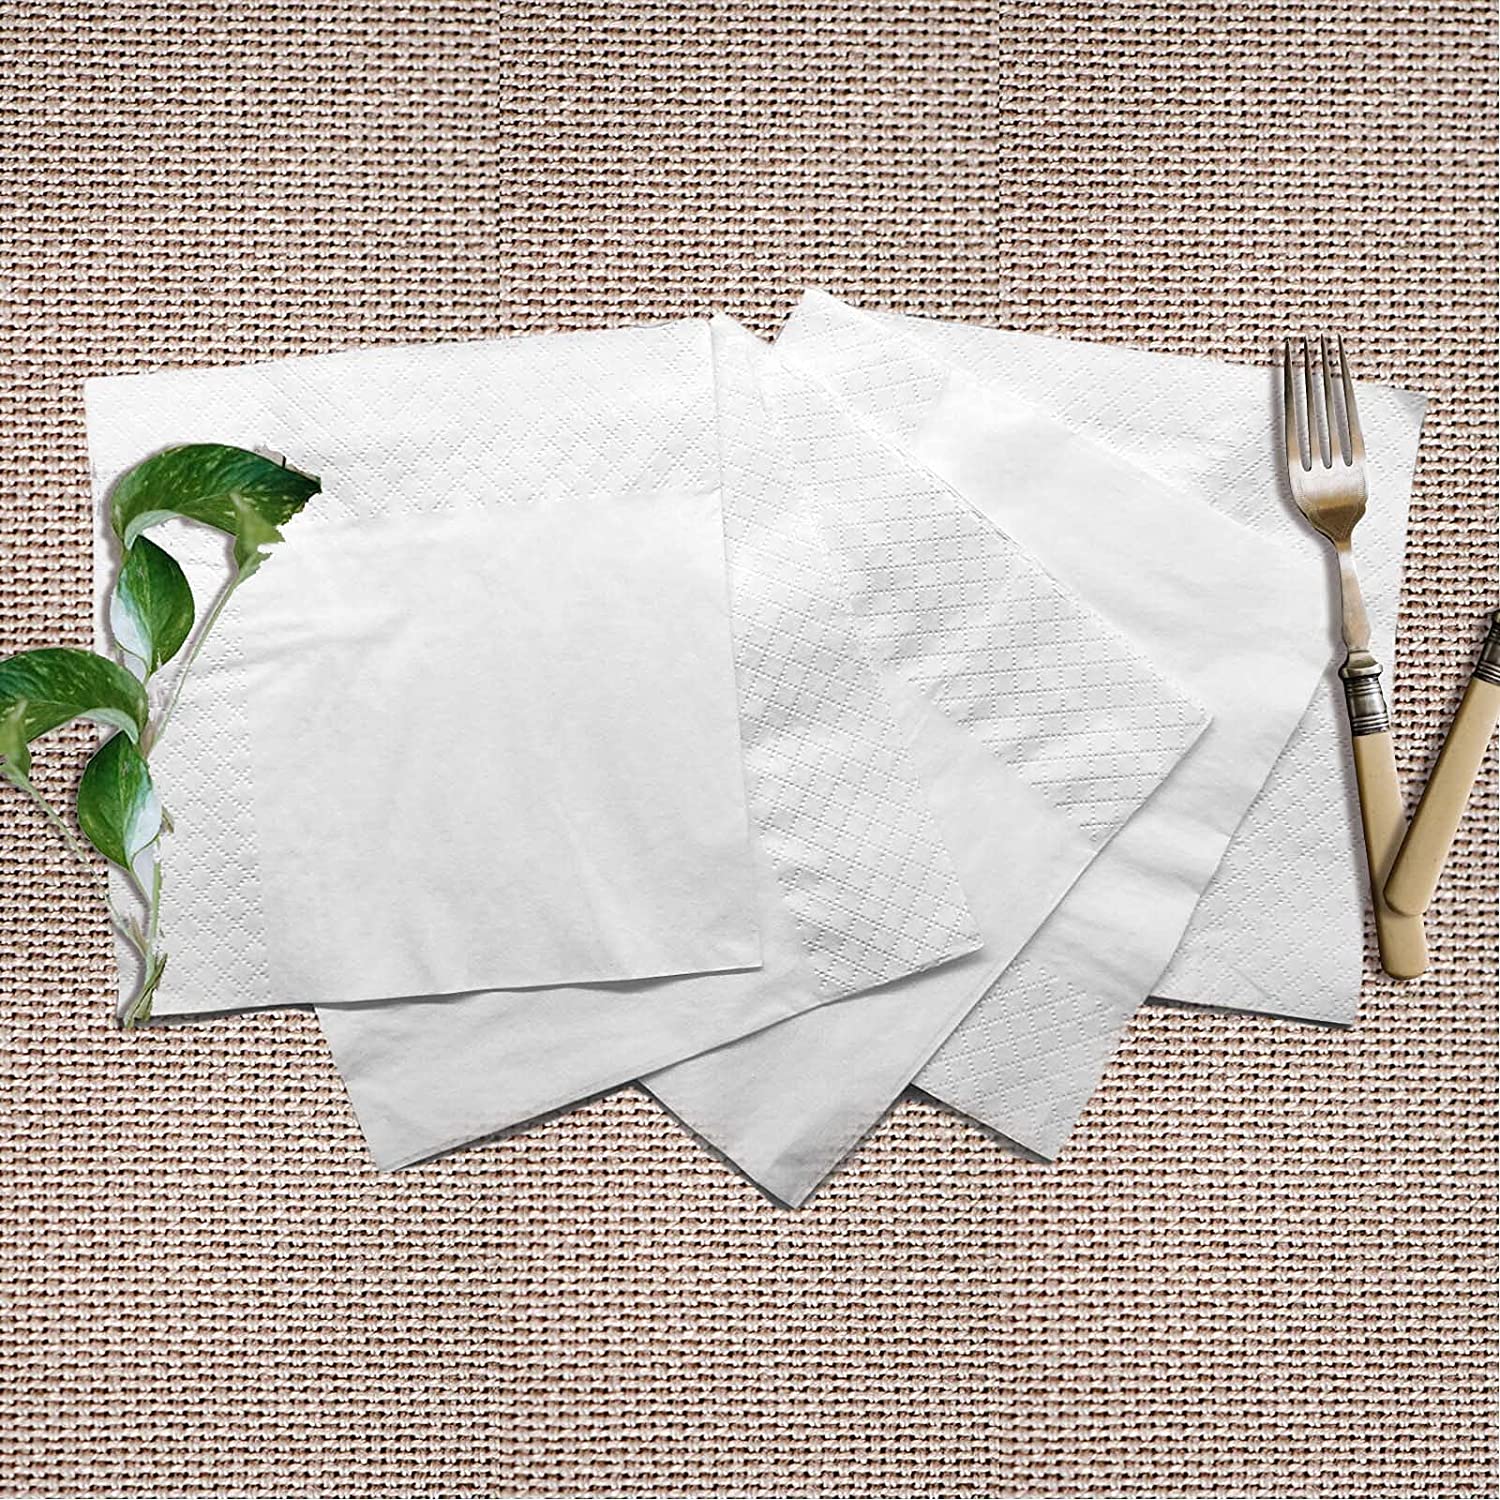 Personalized Cocktail Napkins: The Easy Way to Add an Element of Personality to Special Events